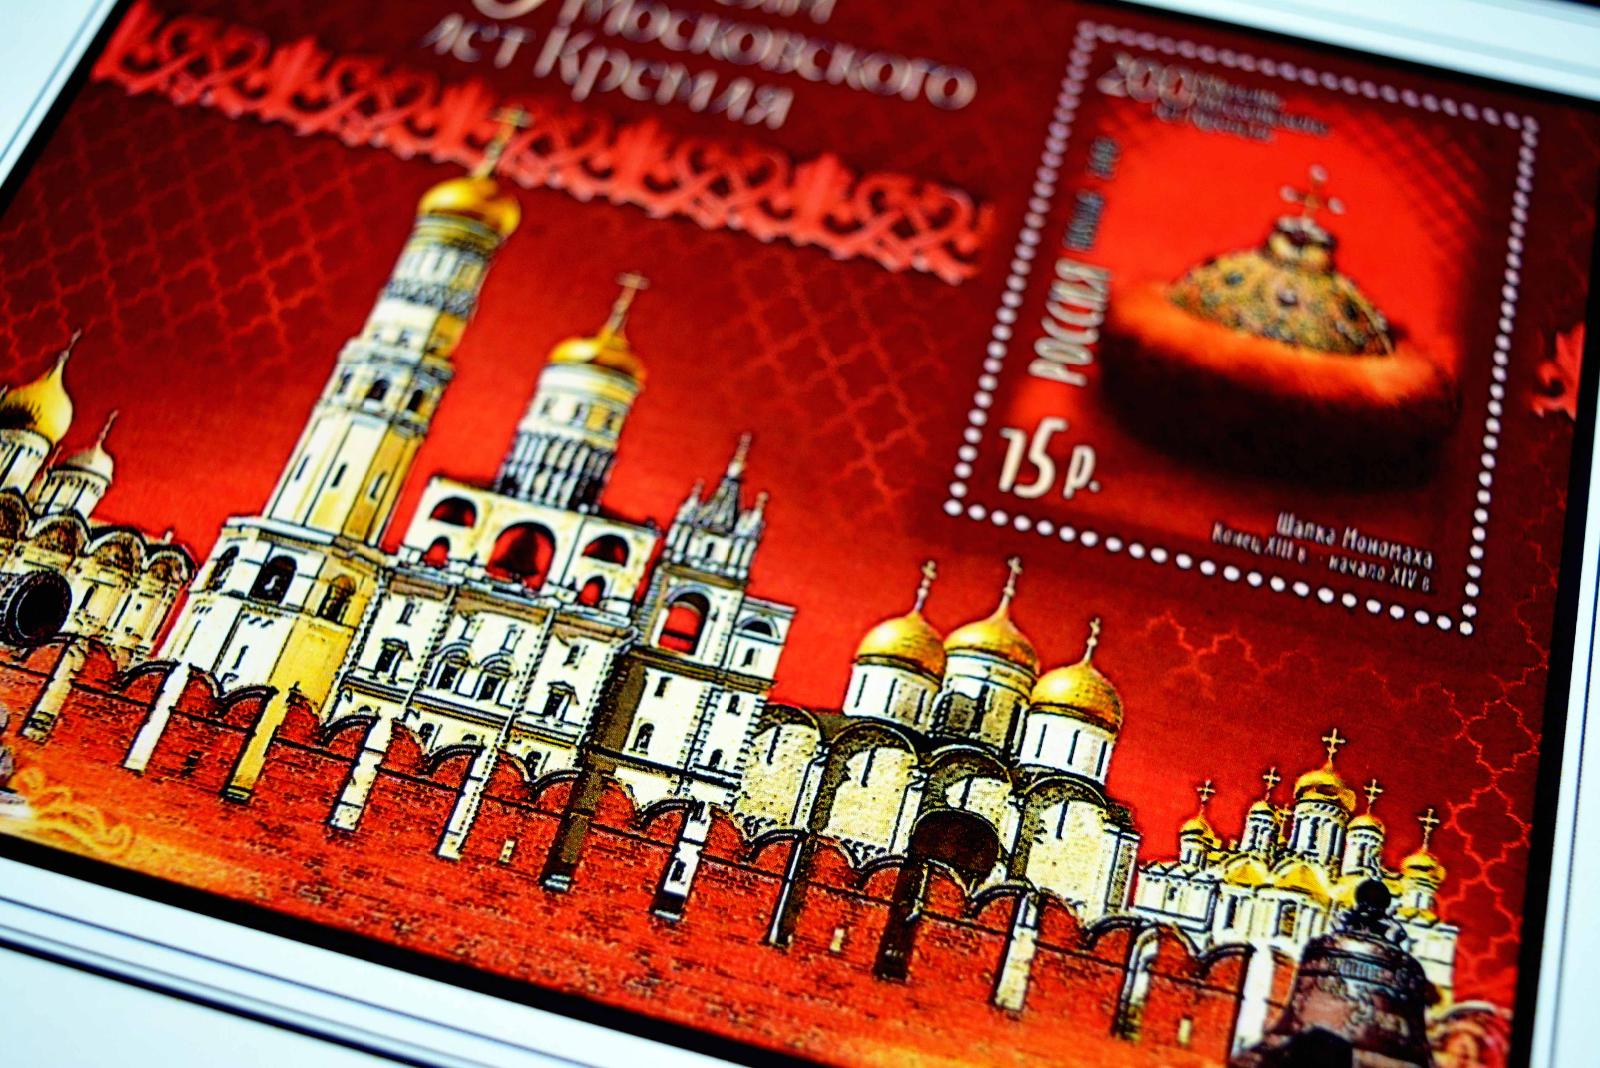 Download COLOR PRINTED RUSSIA 2000-2010 STAMP ALBUM PAGES (193 illustrated pages) | eBay